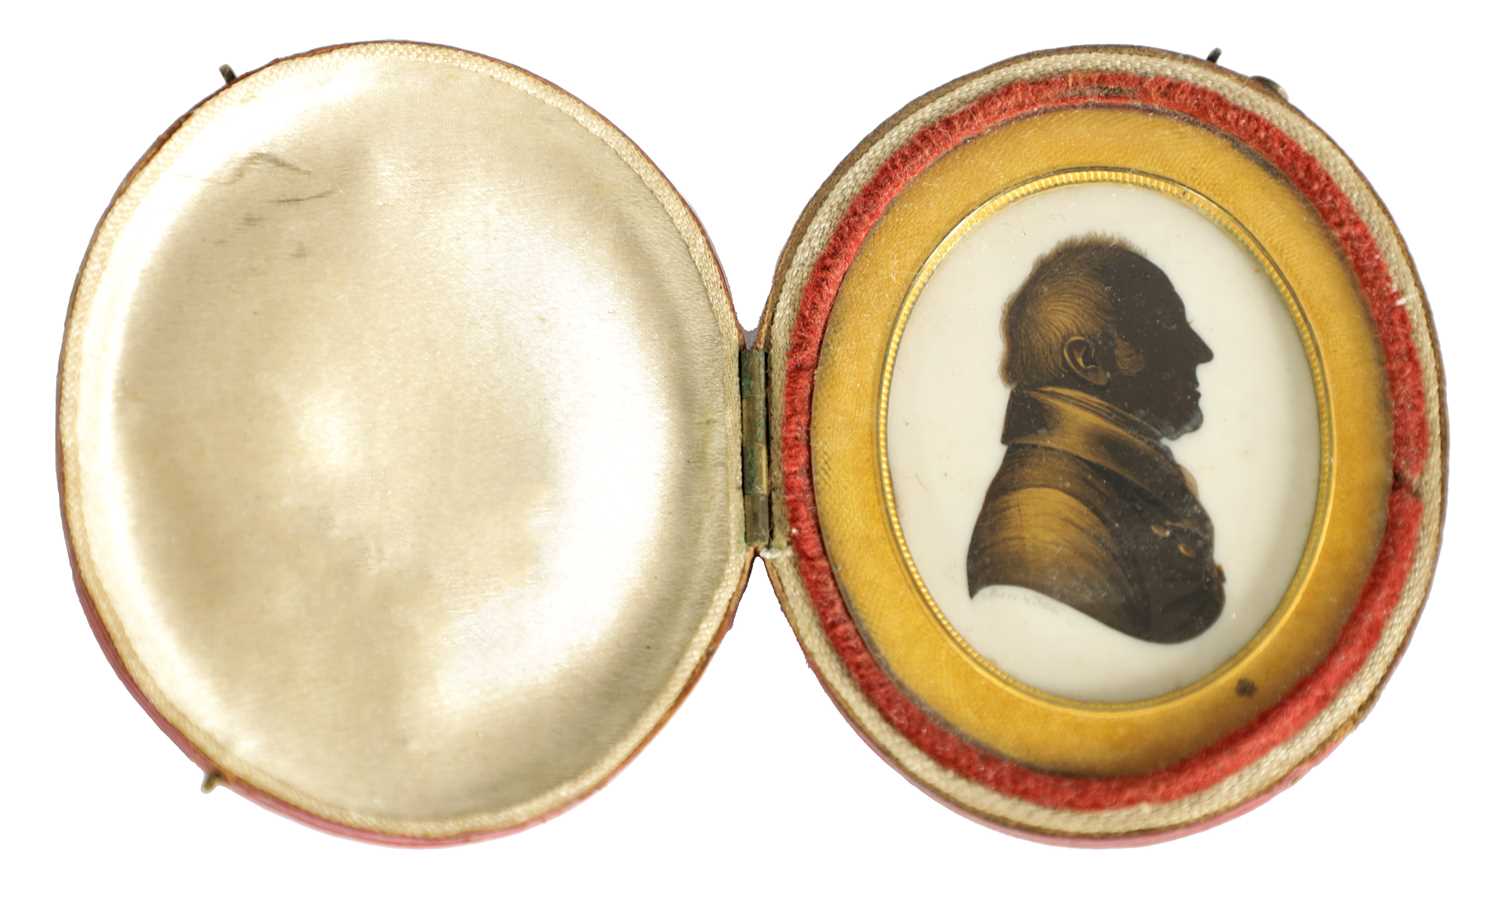 JOHN FIELD - AN EARLY 19TH CENTURY OVAL MINIATURE SILHOUETTE ON IVORY